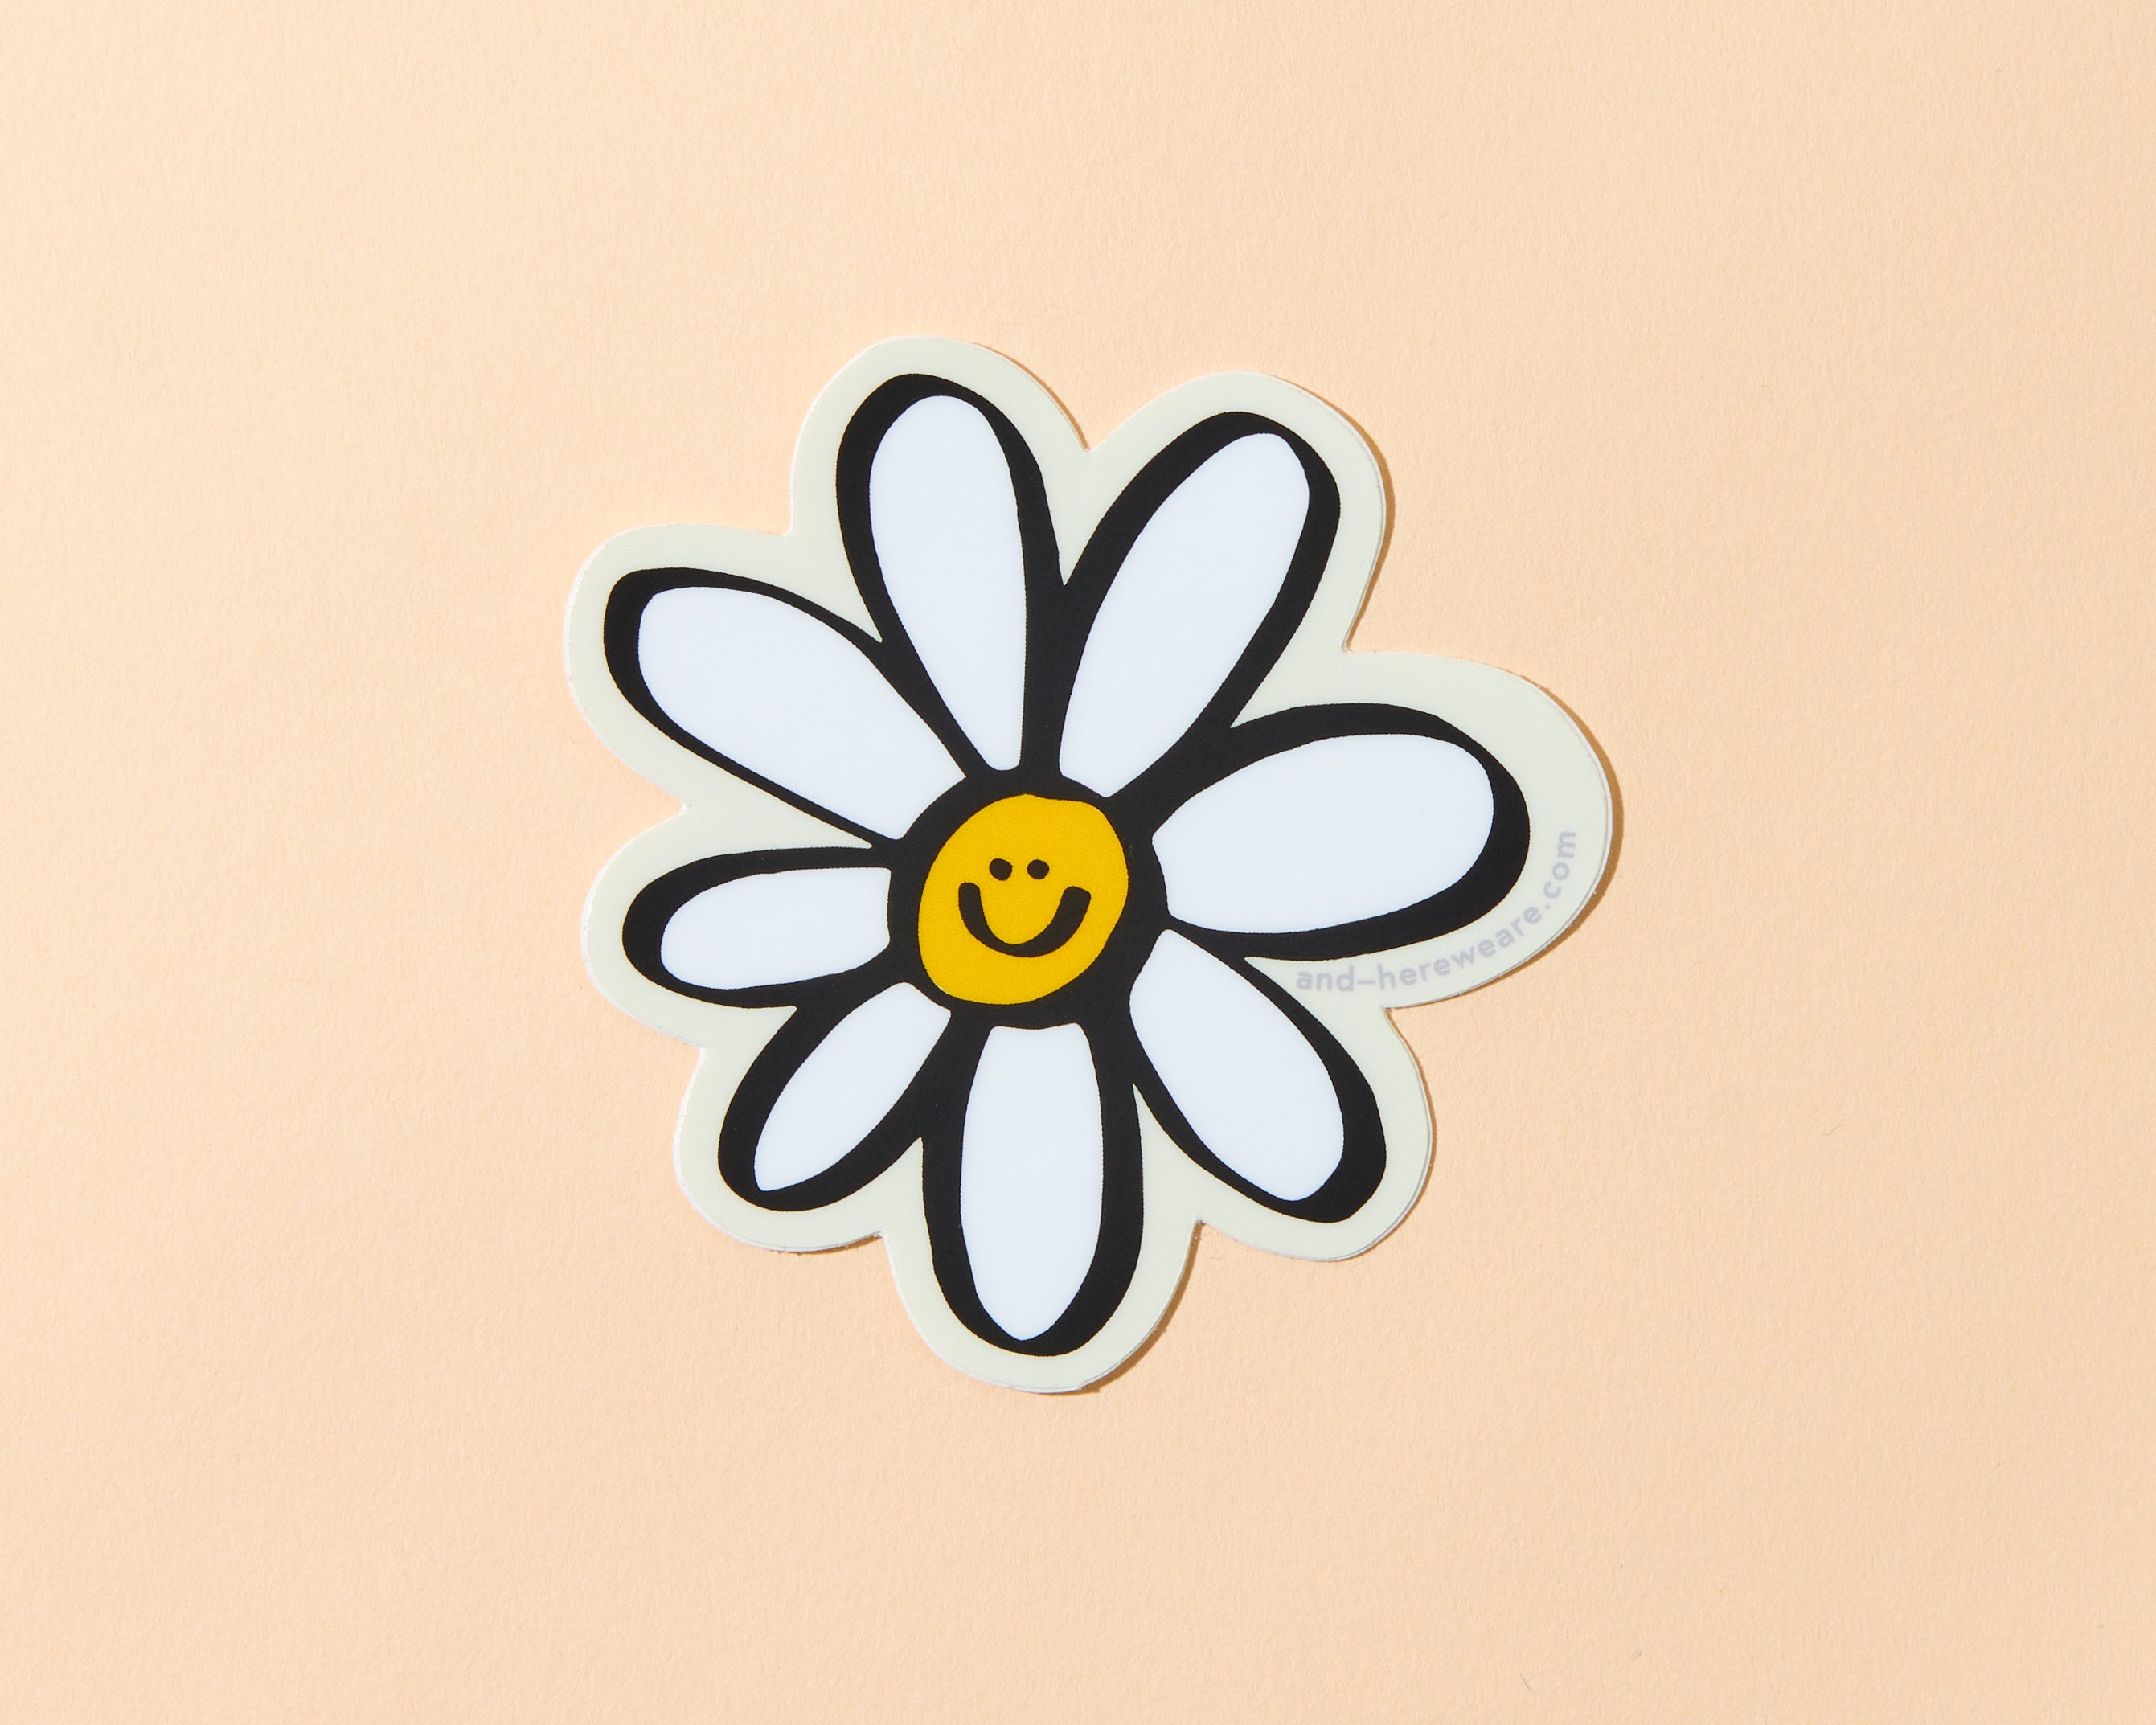 Cute Happy Daisy Stickers 1 Small Flower Smiling Daisy Stickers to